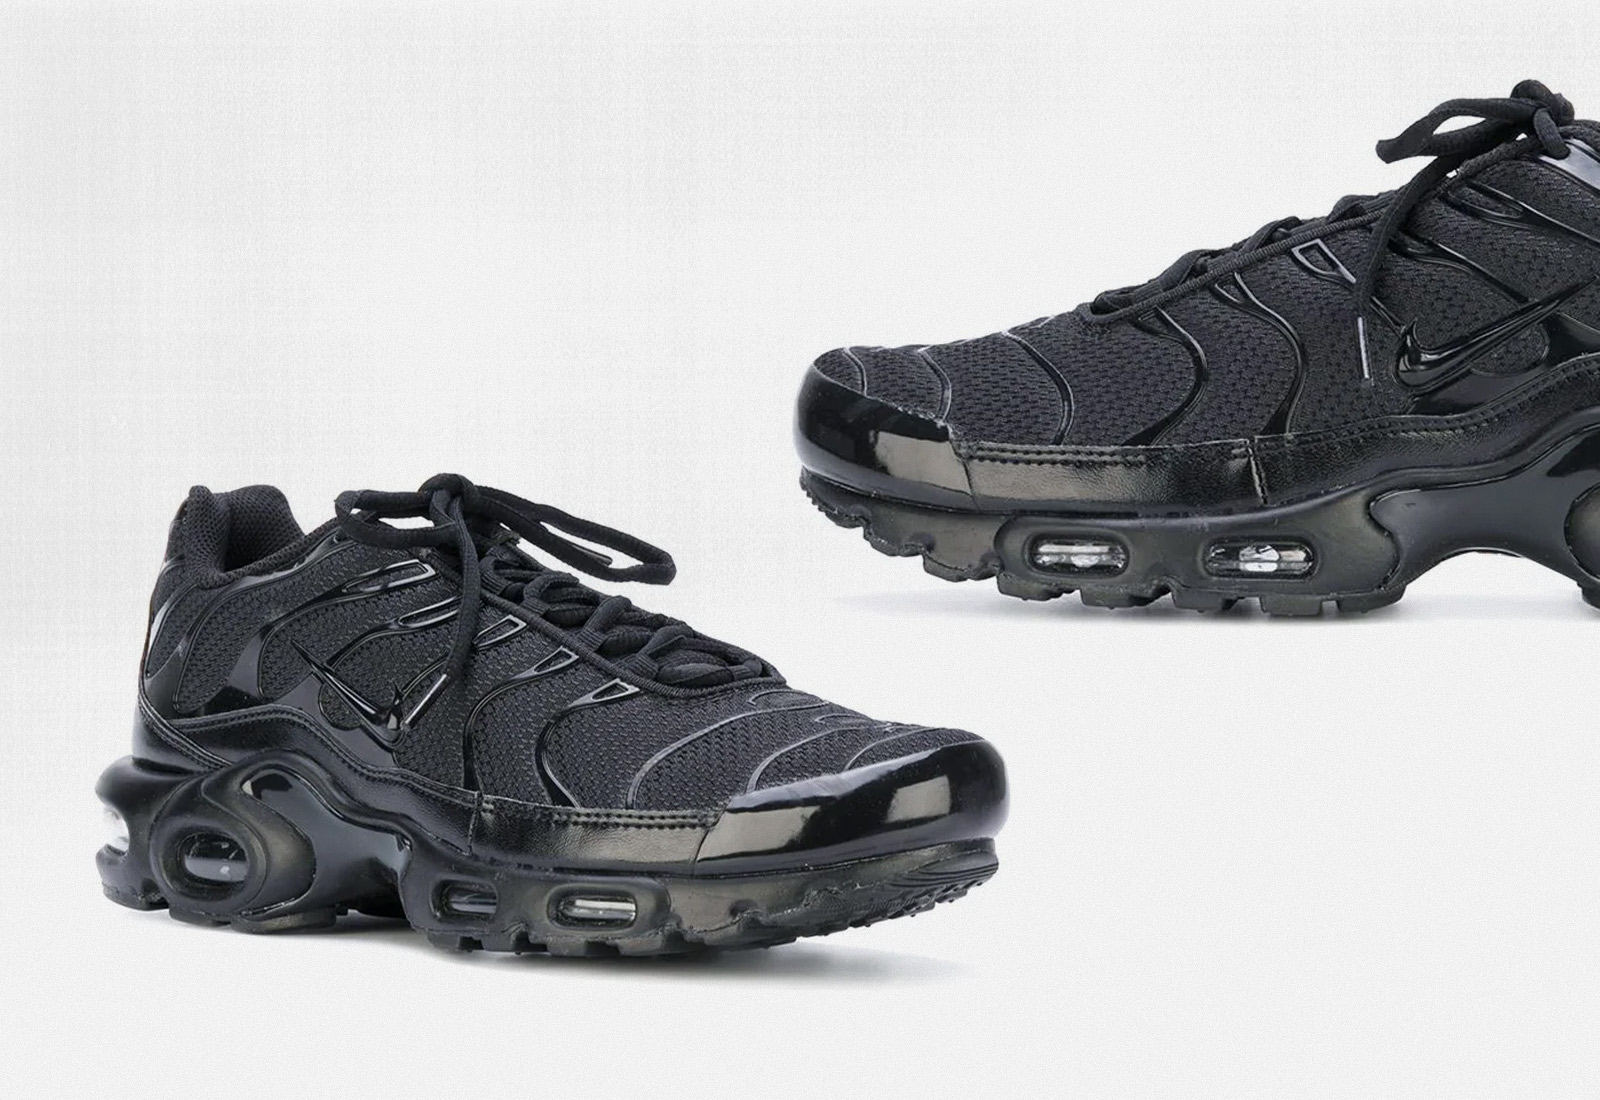 the nike air max Tailwind worn by EMINEM in the music video not